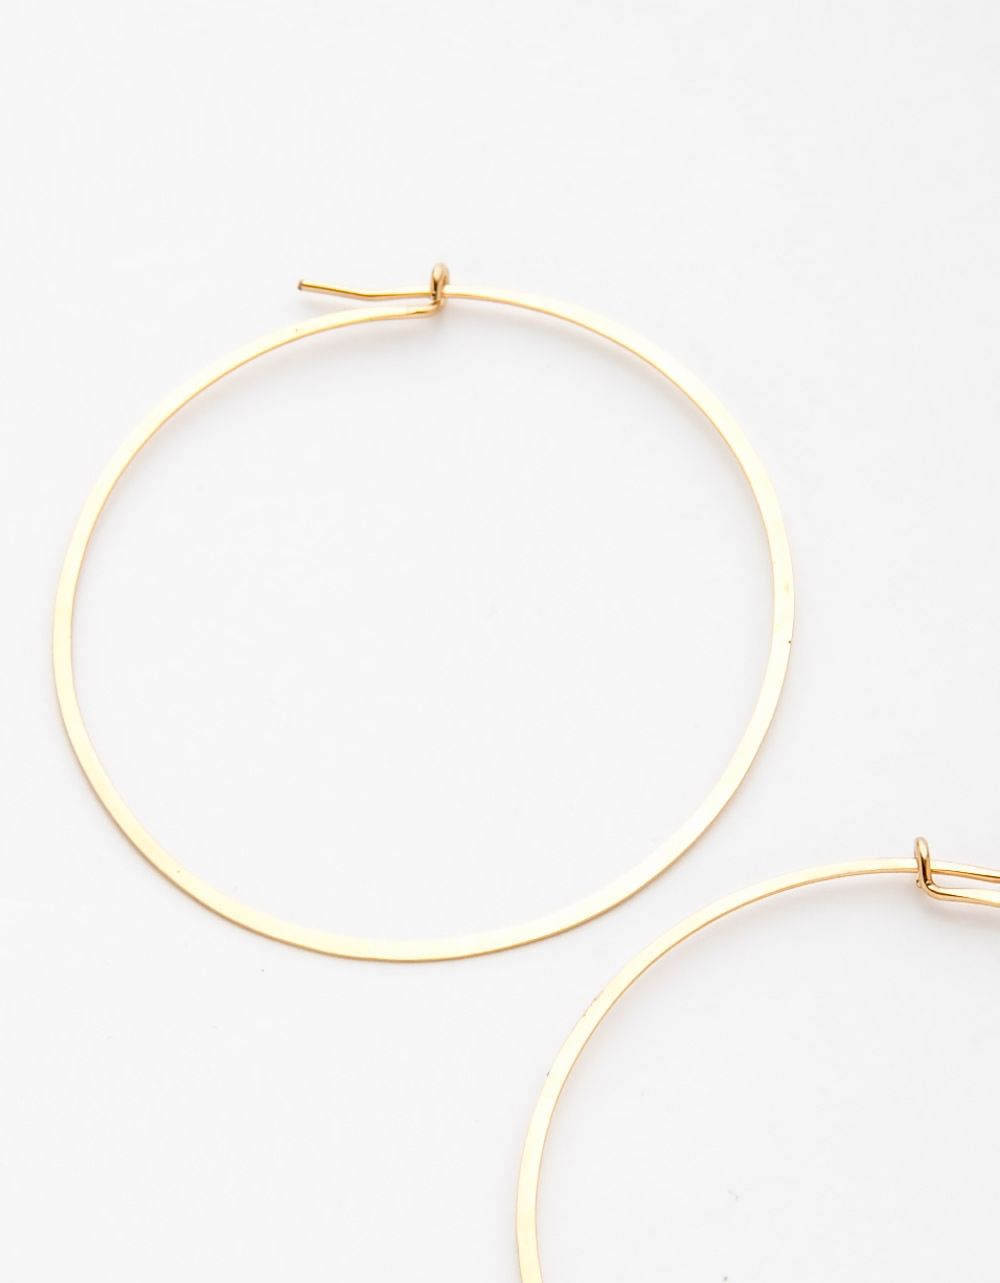 Large Round Hoops in Gold by Jenny Sheriff_1